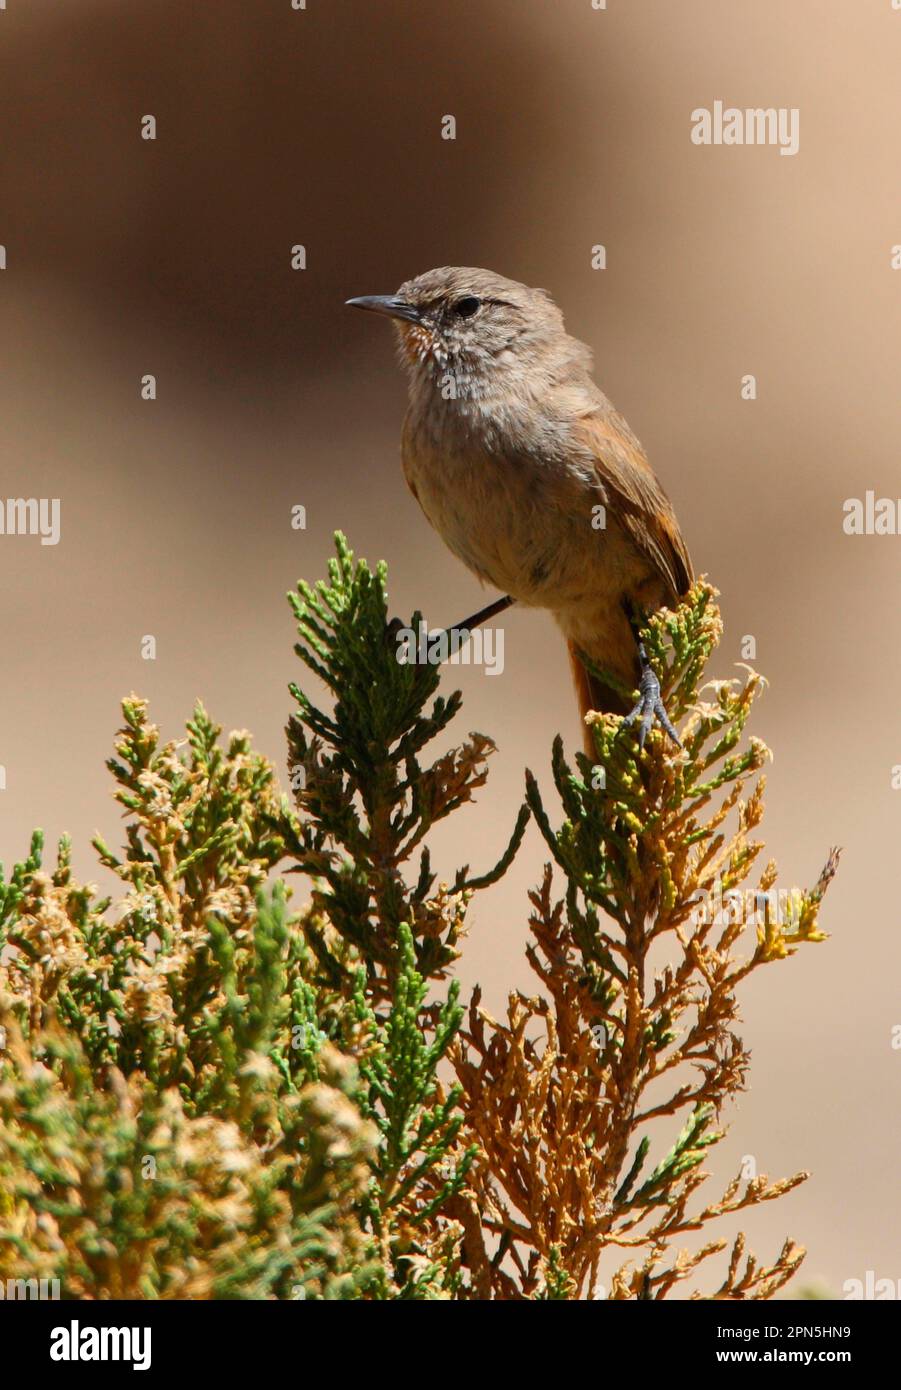 Puna Canastero (Asthenes sclateri) adult, perched on bush, Jujuy, Argentina Stock Photo